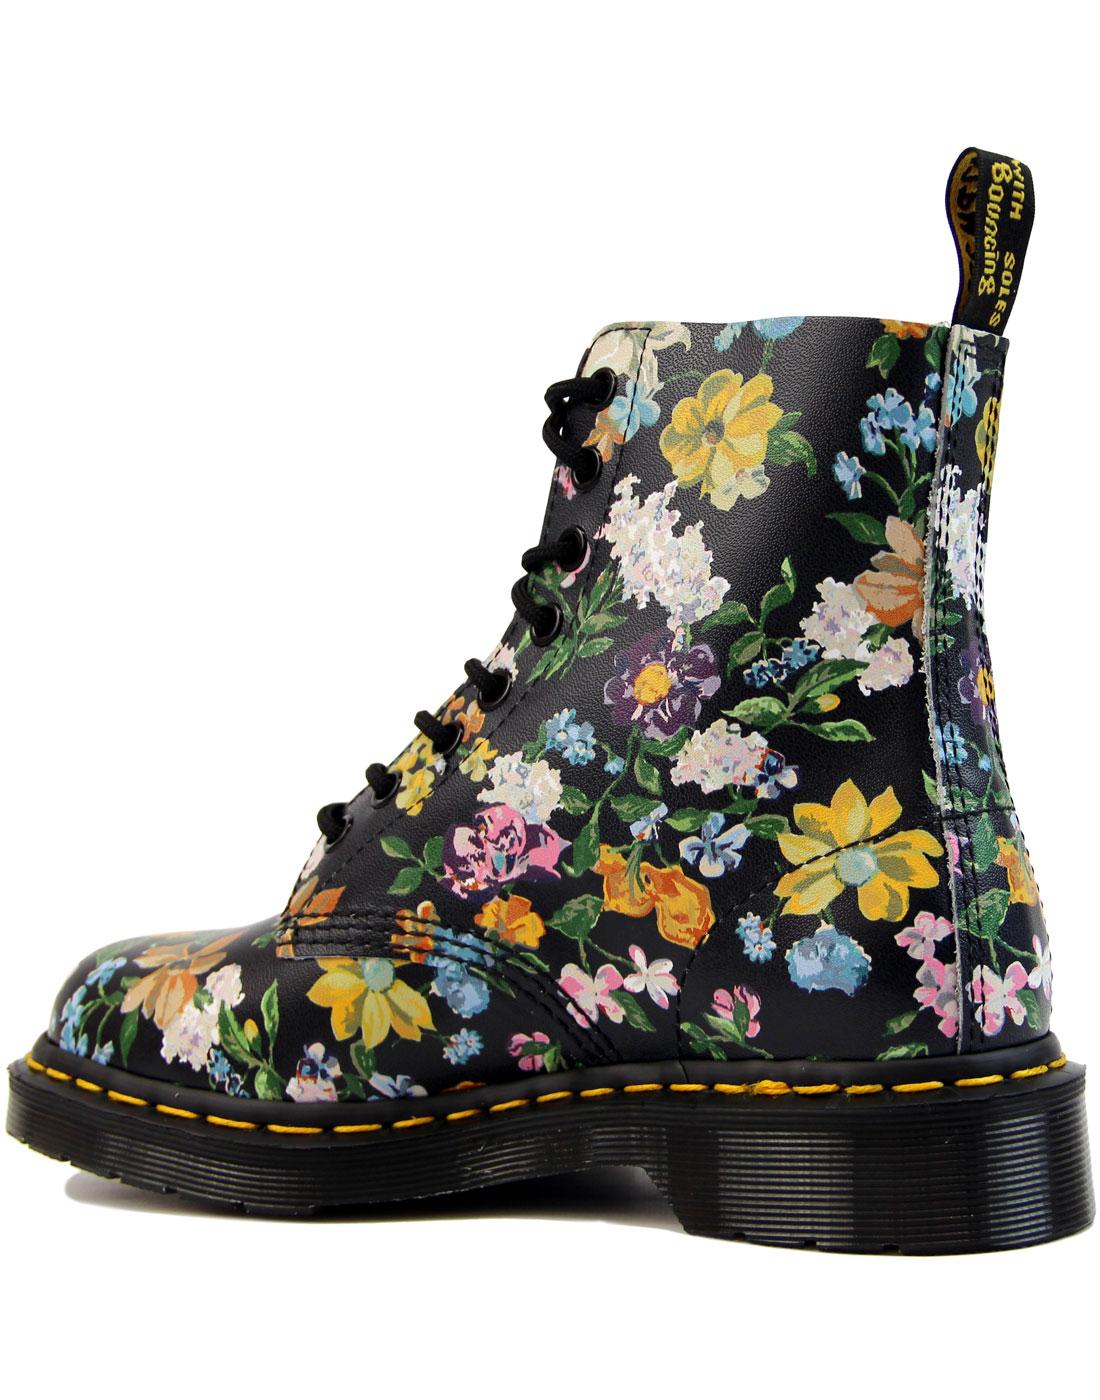 DR MARTENS Darcy Floral Pascal Archive 1990s Retro Flower Boots